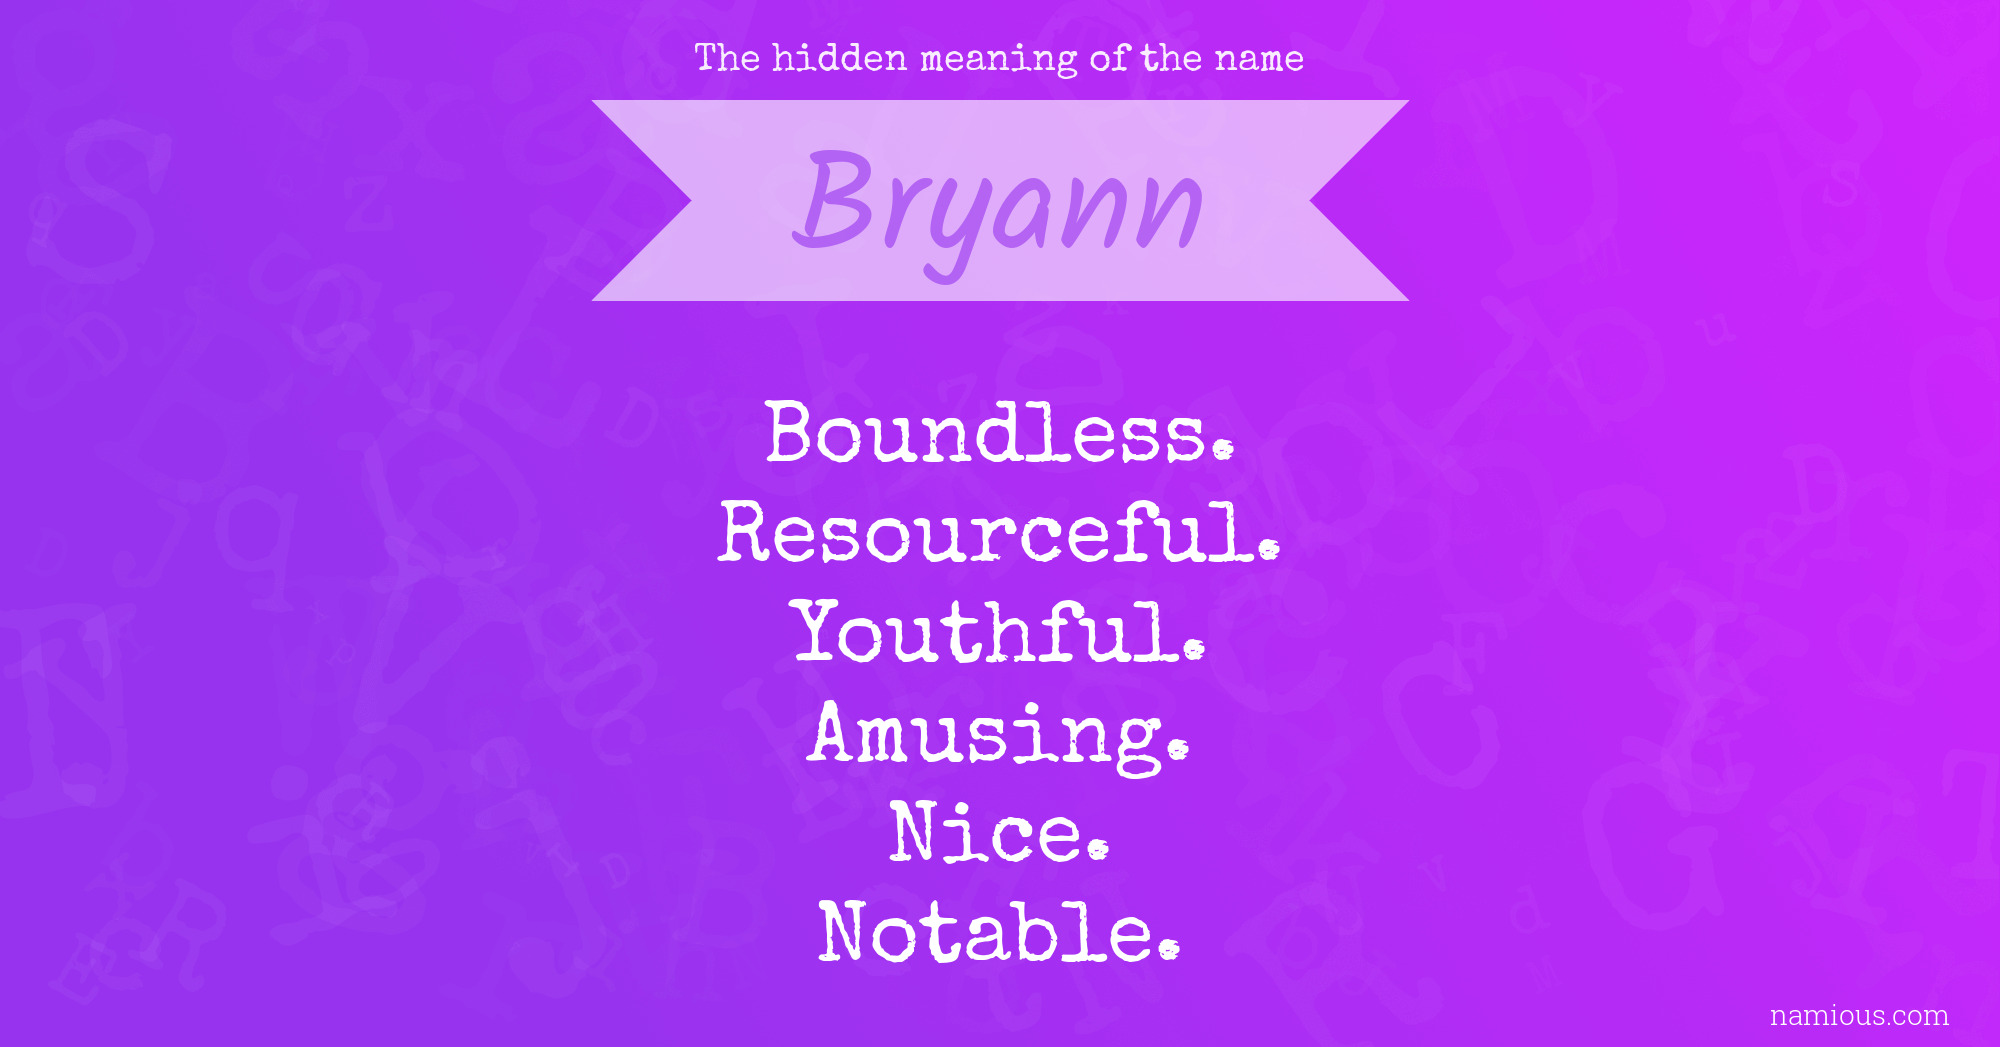 The hidden meaning of the name Bryann